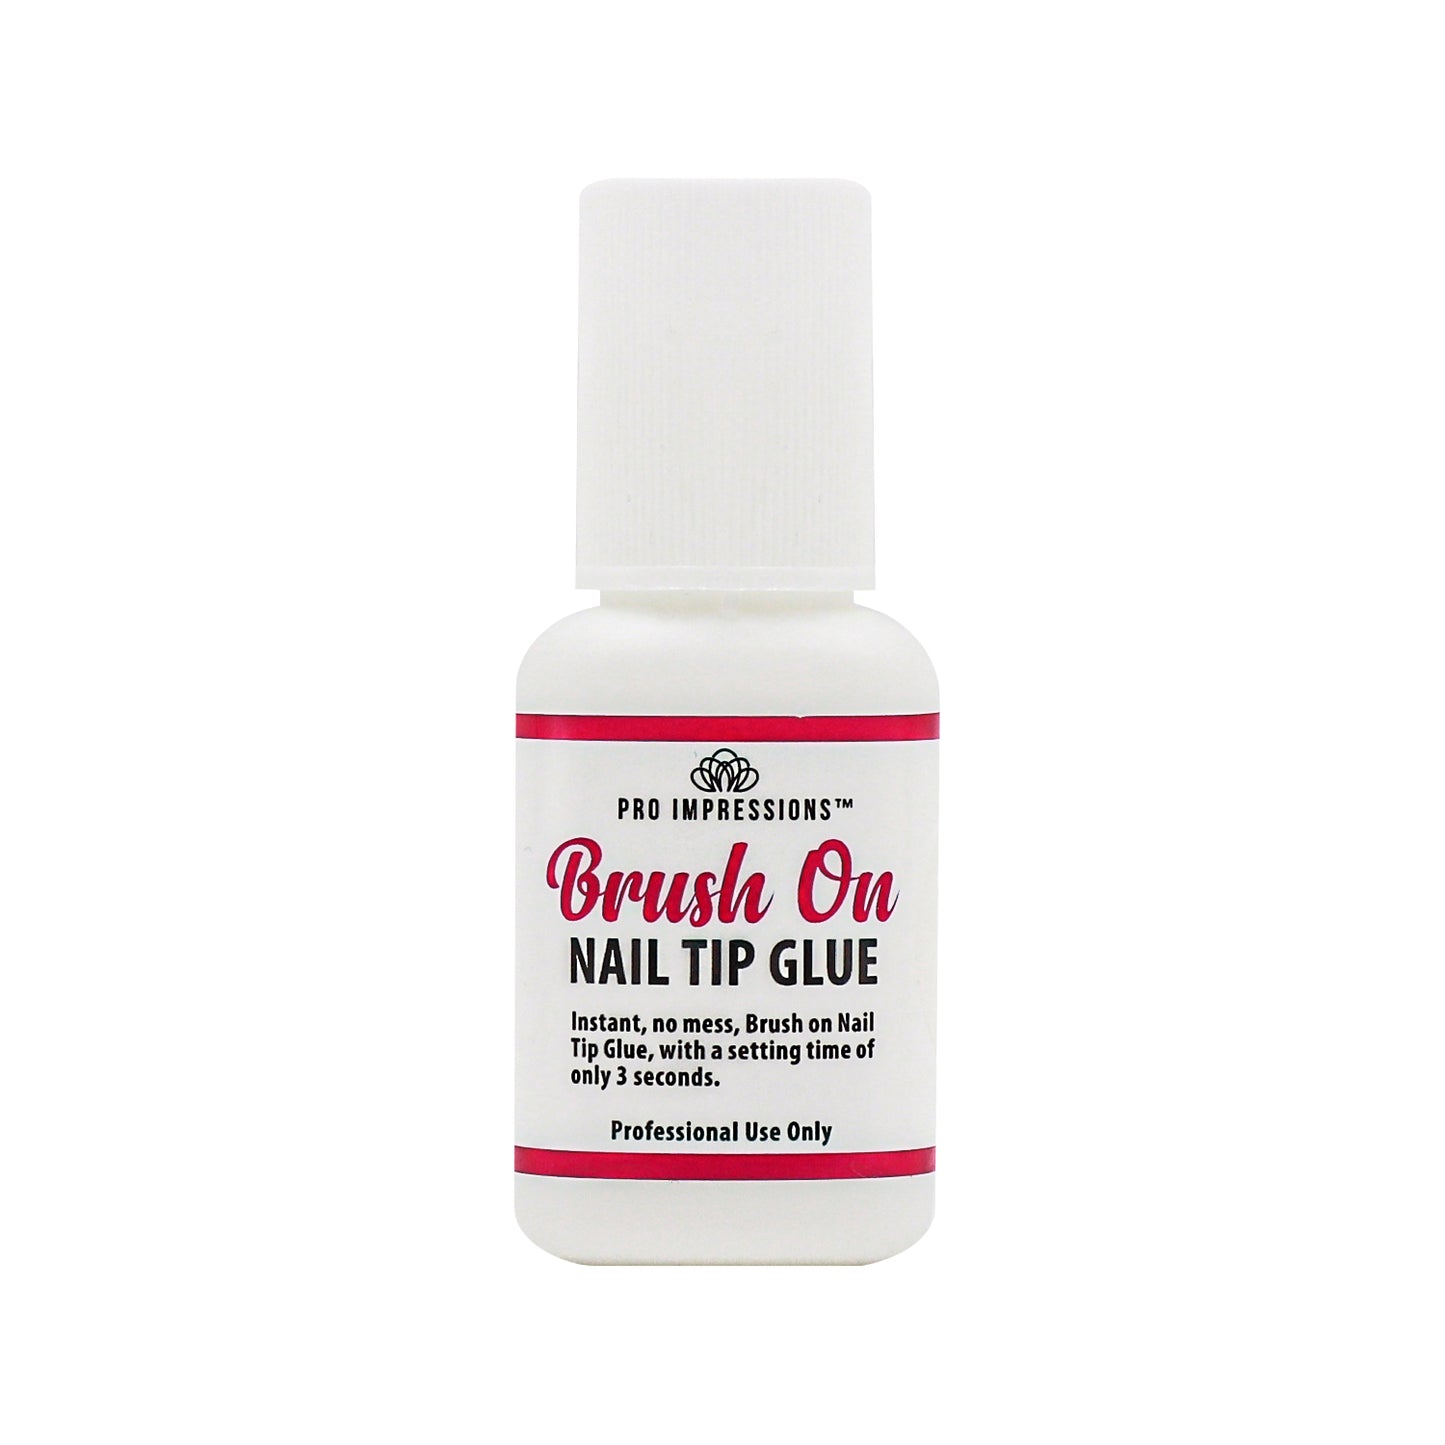 Advance Clear® Cut Out / Half Well Nail Tips